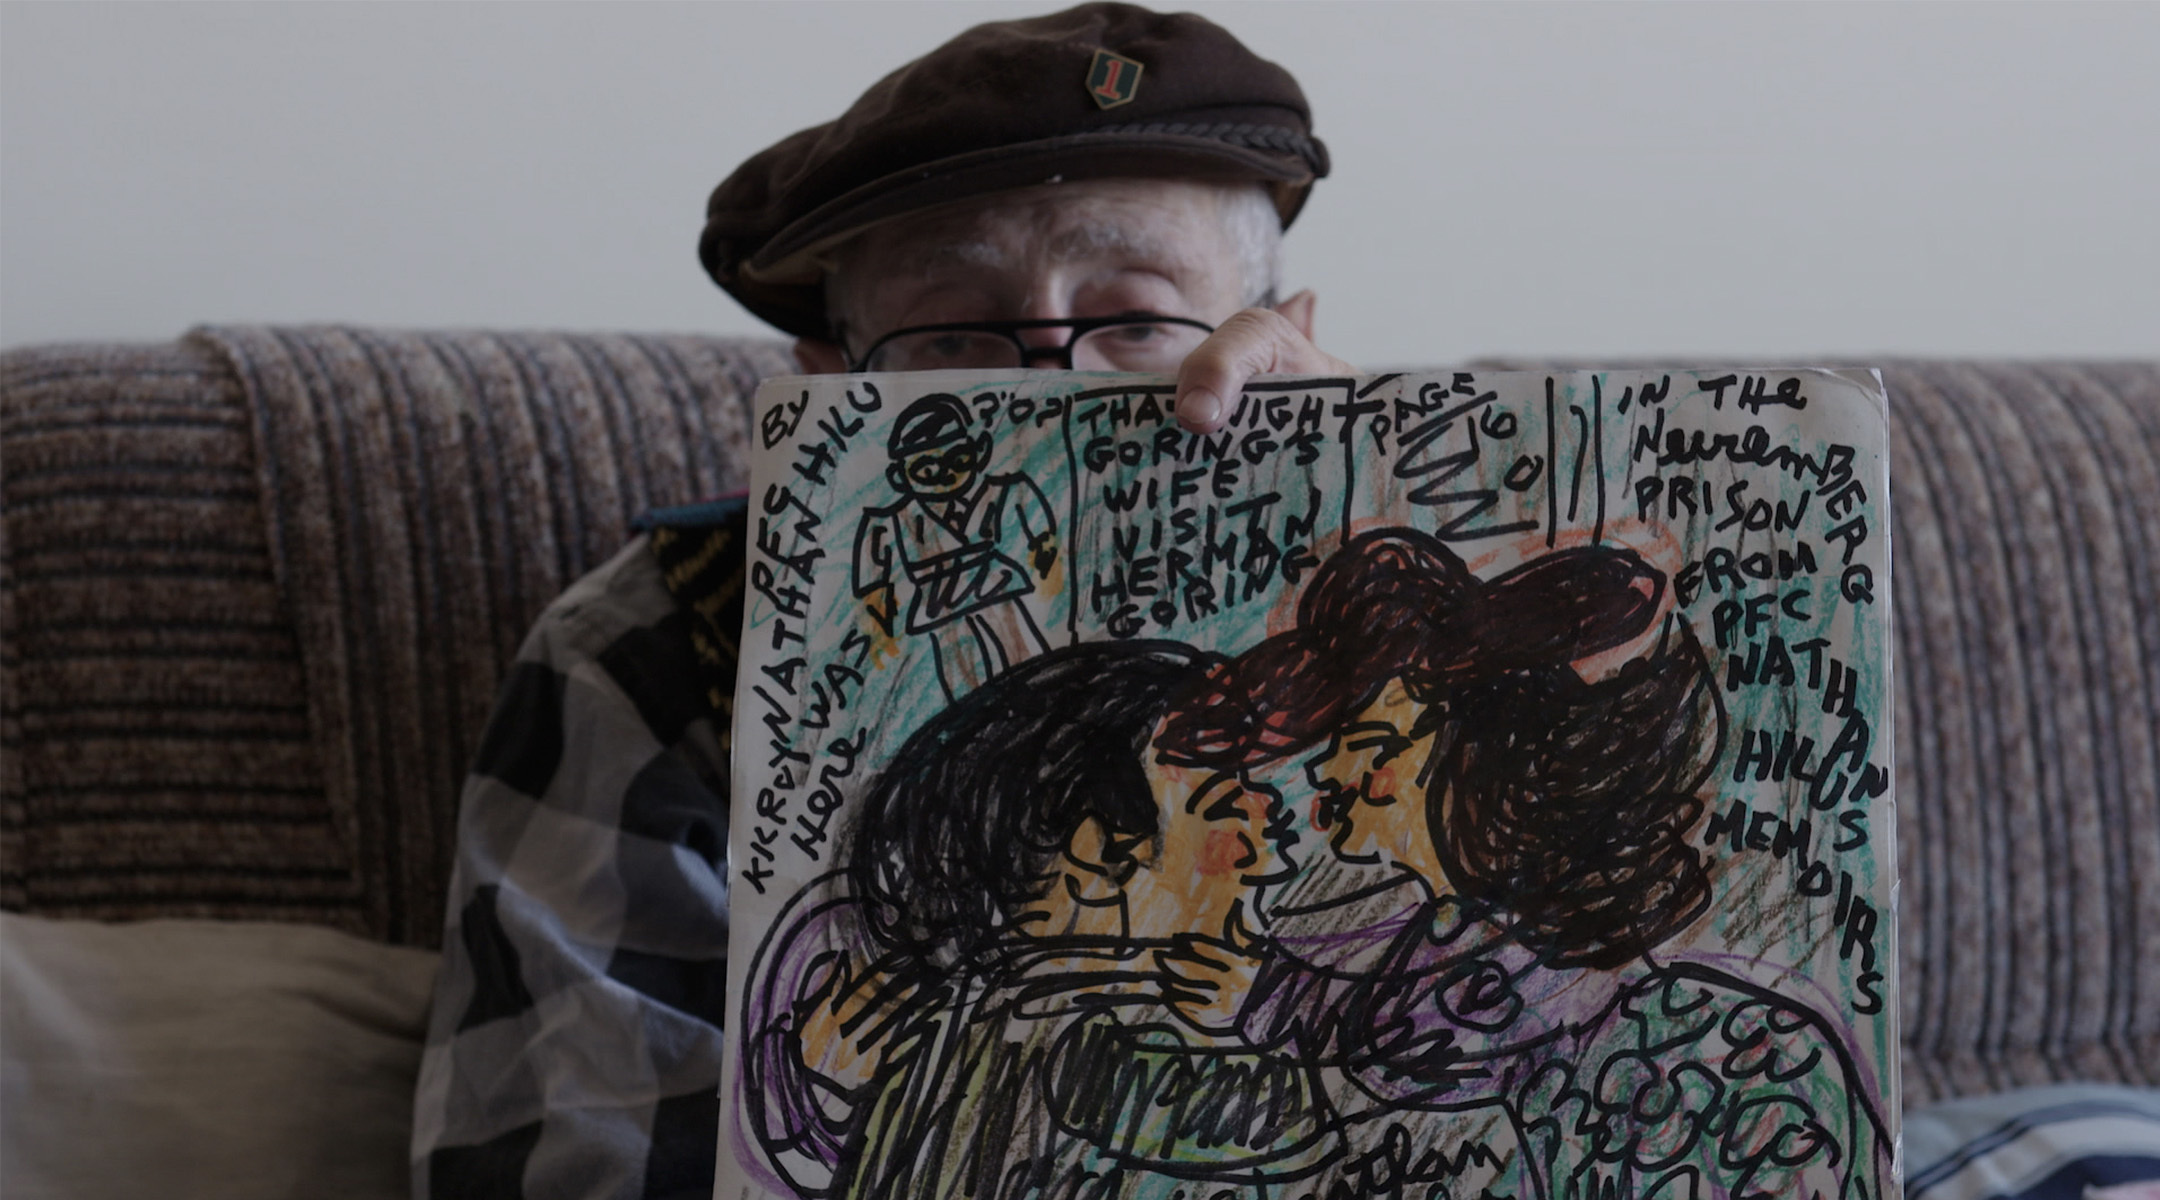 Outsider artist Nathan Hilu, who created thousands of drawings about his time as a young soldier guarding Nazis during the Nuremberg trials, is the subject of a new documentary by Elan Golod, “Nathanism.” (Courtesy Elan Gold)